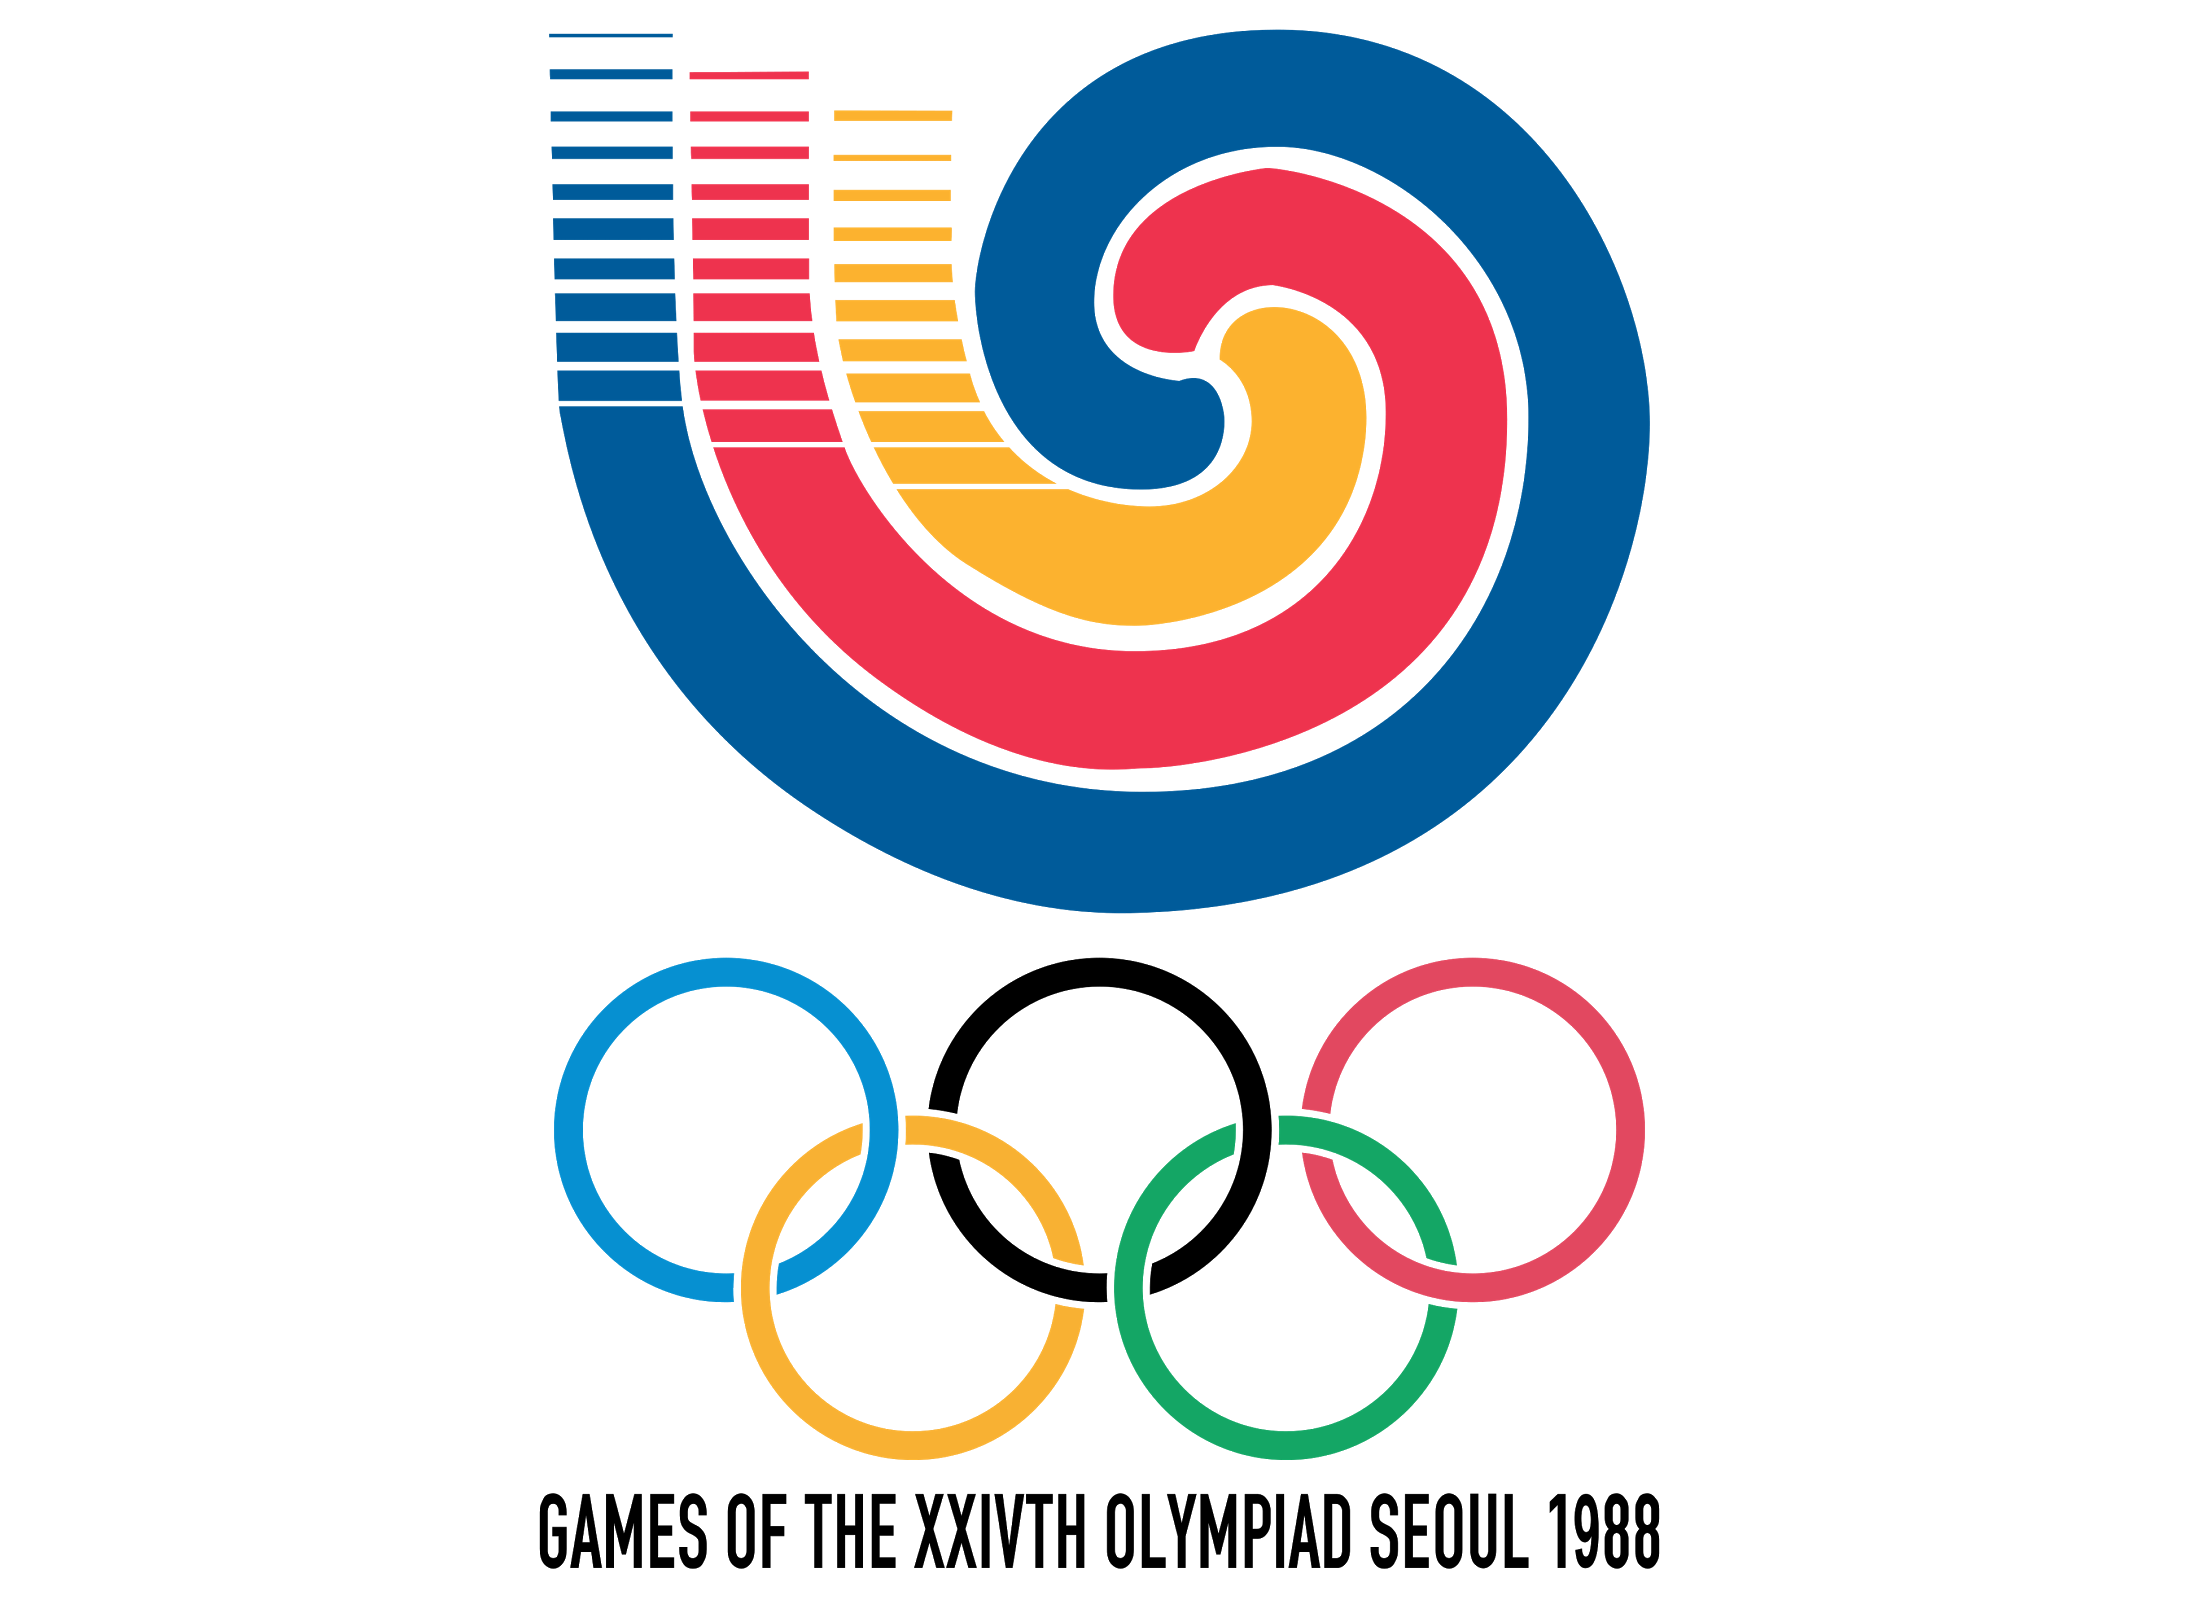 Latin American countries with the most Olympic medals